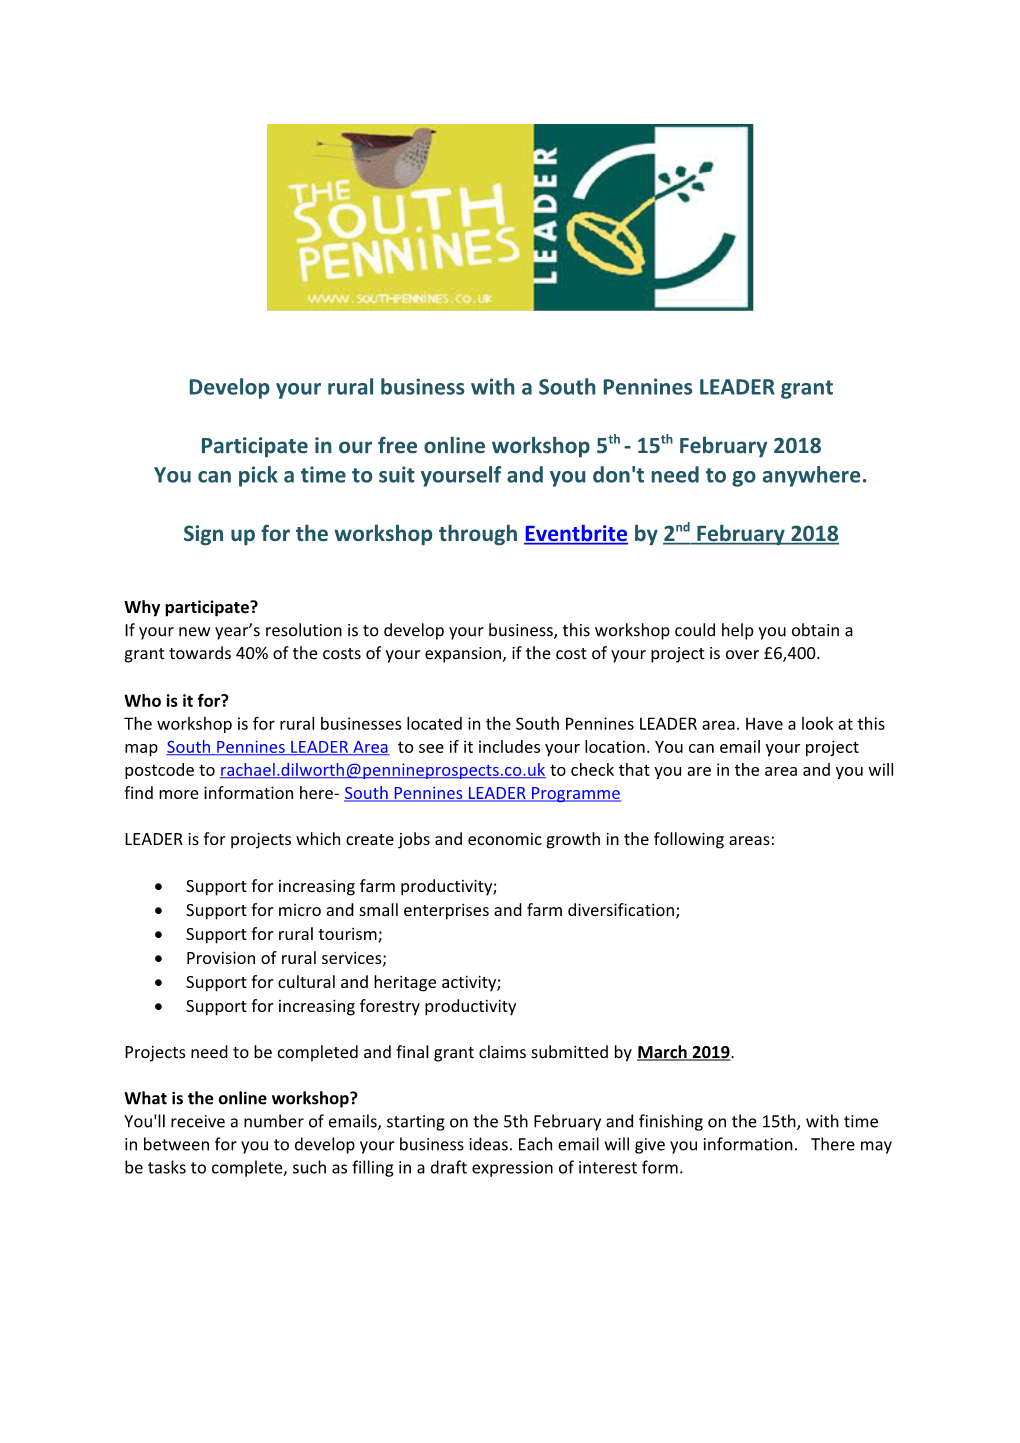 Develop Your Rural Business with a South Pennines LEADER Grant